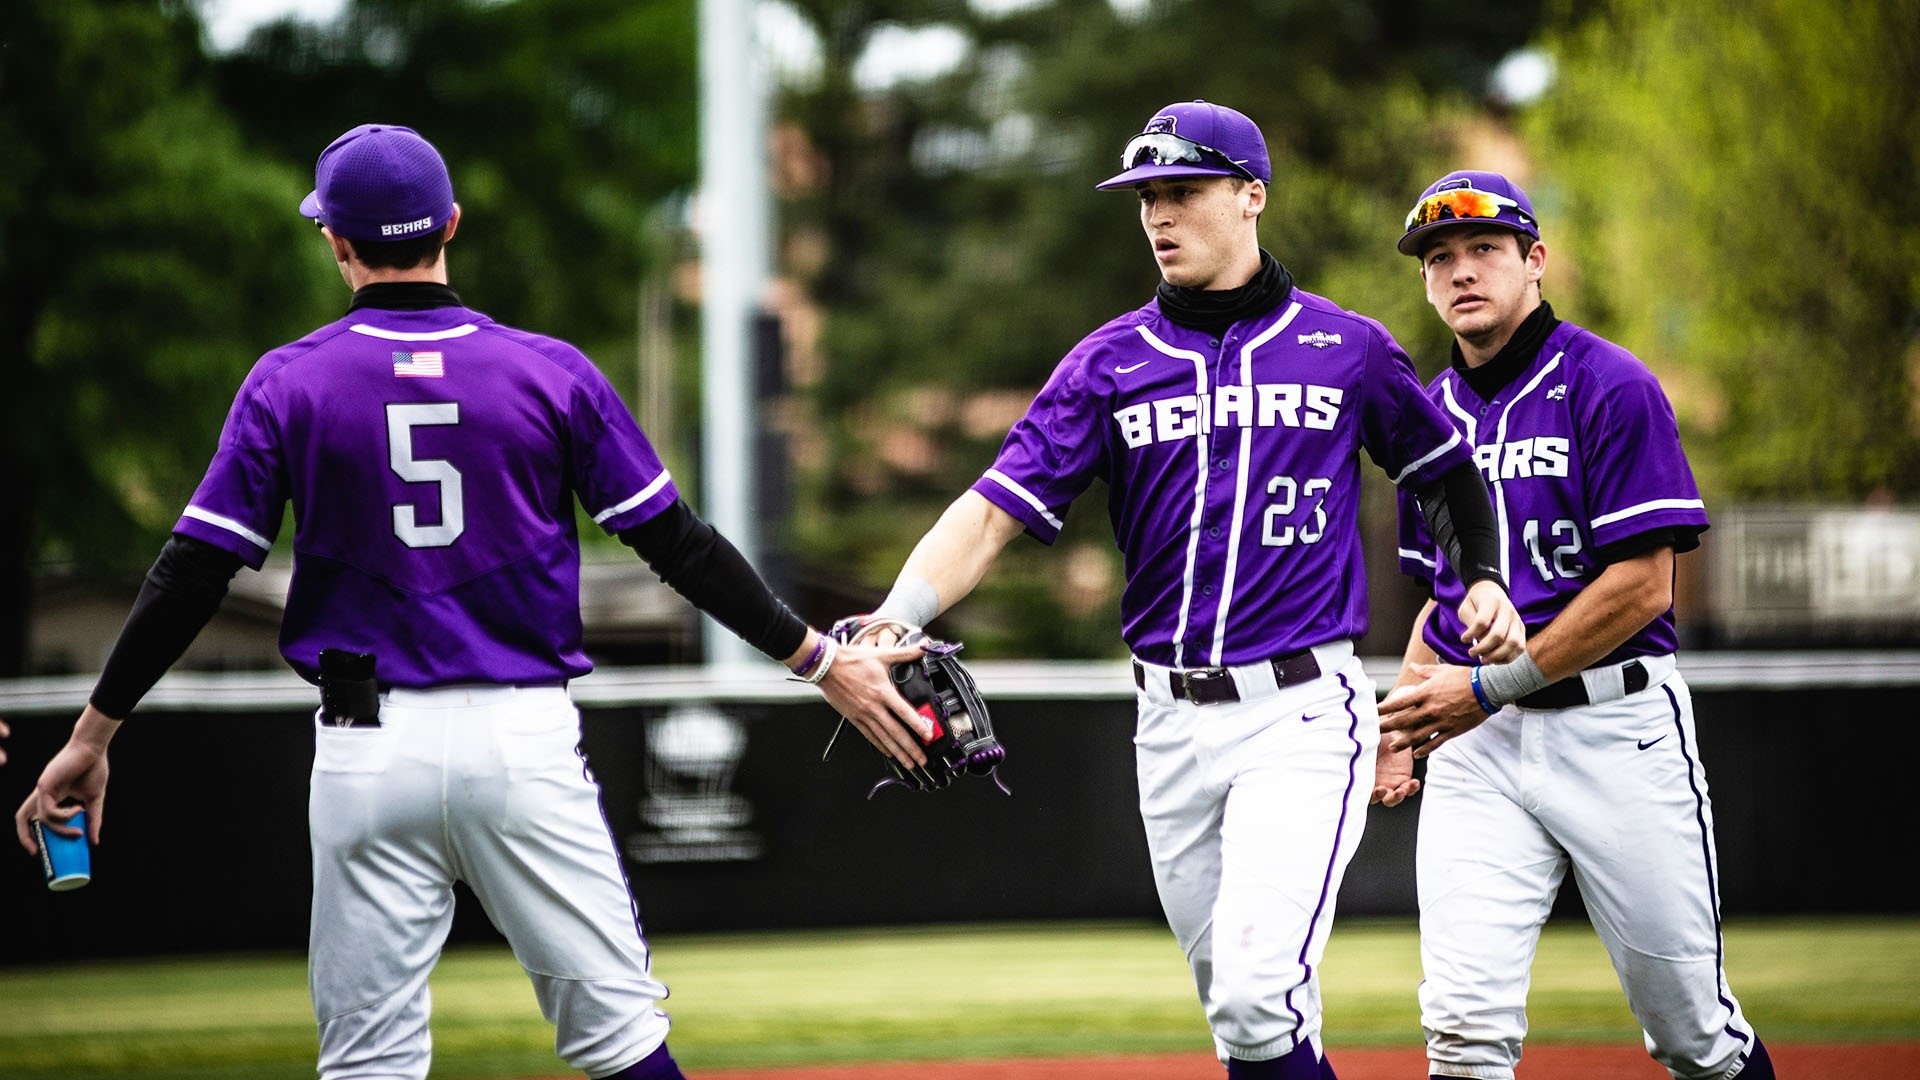 UCA would come back to win the nightcap 3-1 to earn a split of Friday's doubleheader